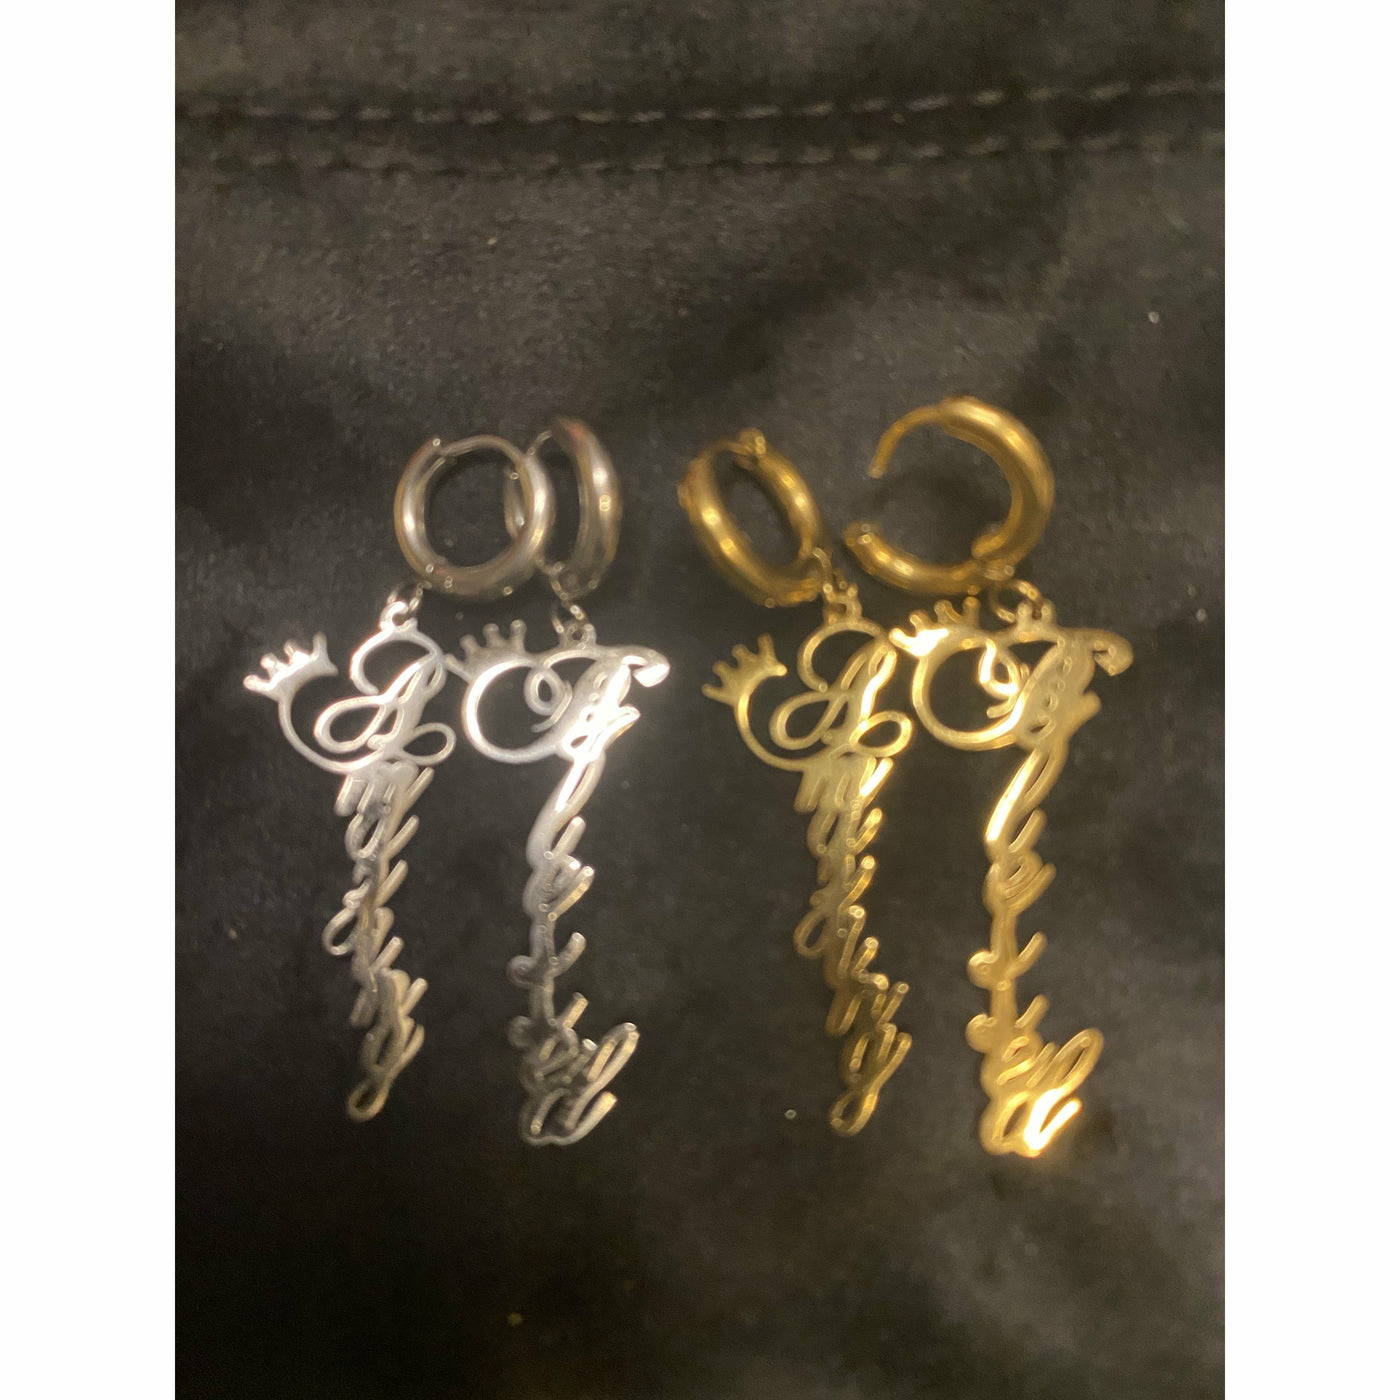 Amazing & Blessed Earrings Silver or Gold Tone